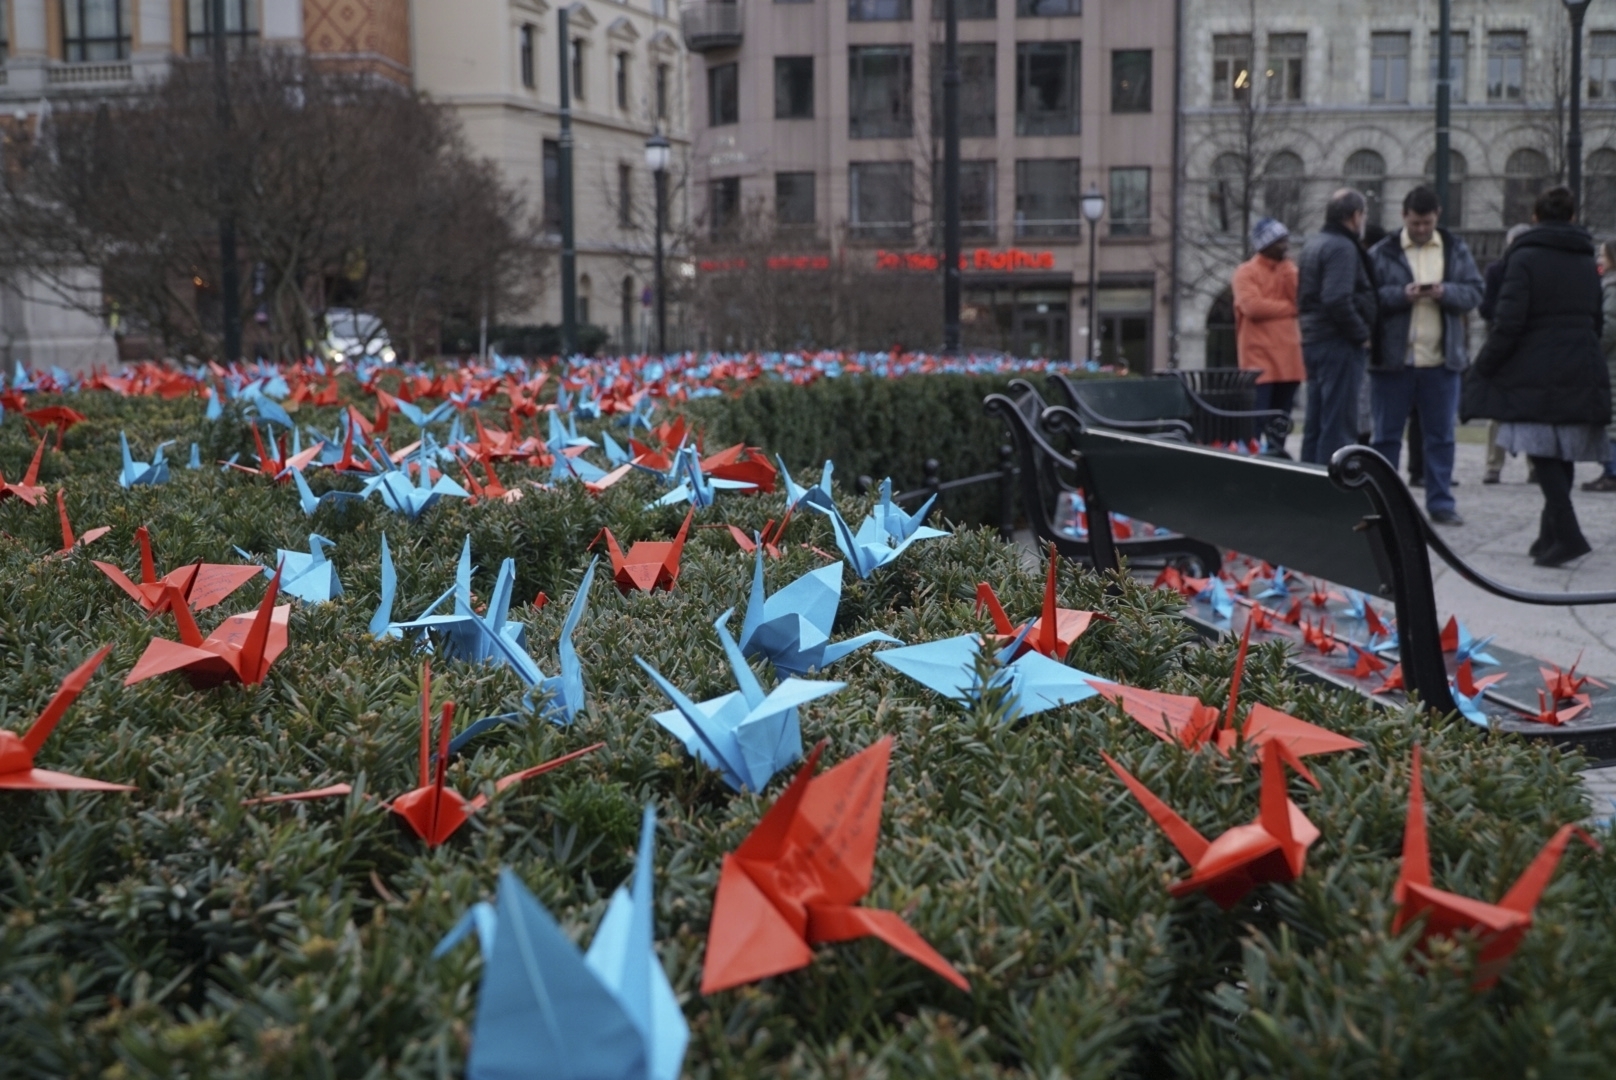 A thousand paper cranes installed by anti-nuclear activists in front of the Norwegian parliament in Oslo, Saturday, Dec. 9, 2017.   The International Campaign to Abolish Nuclear Weapons is the recipient on this year’s Nobel Peace Prize, has installed 1,000 paper cranes made by children in Hiroshima, the site of the world’s first atomic bomb attack in Japan, outside the Norwegian Parliament ahead of formally receiving the prize. (AP Photo/David Keyton)